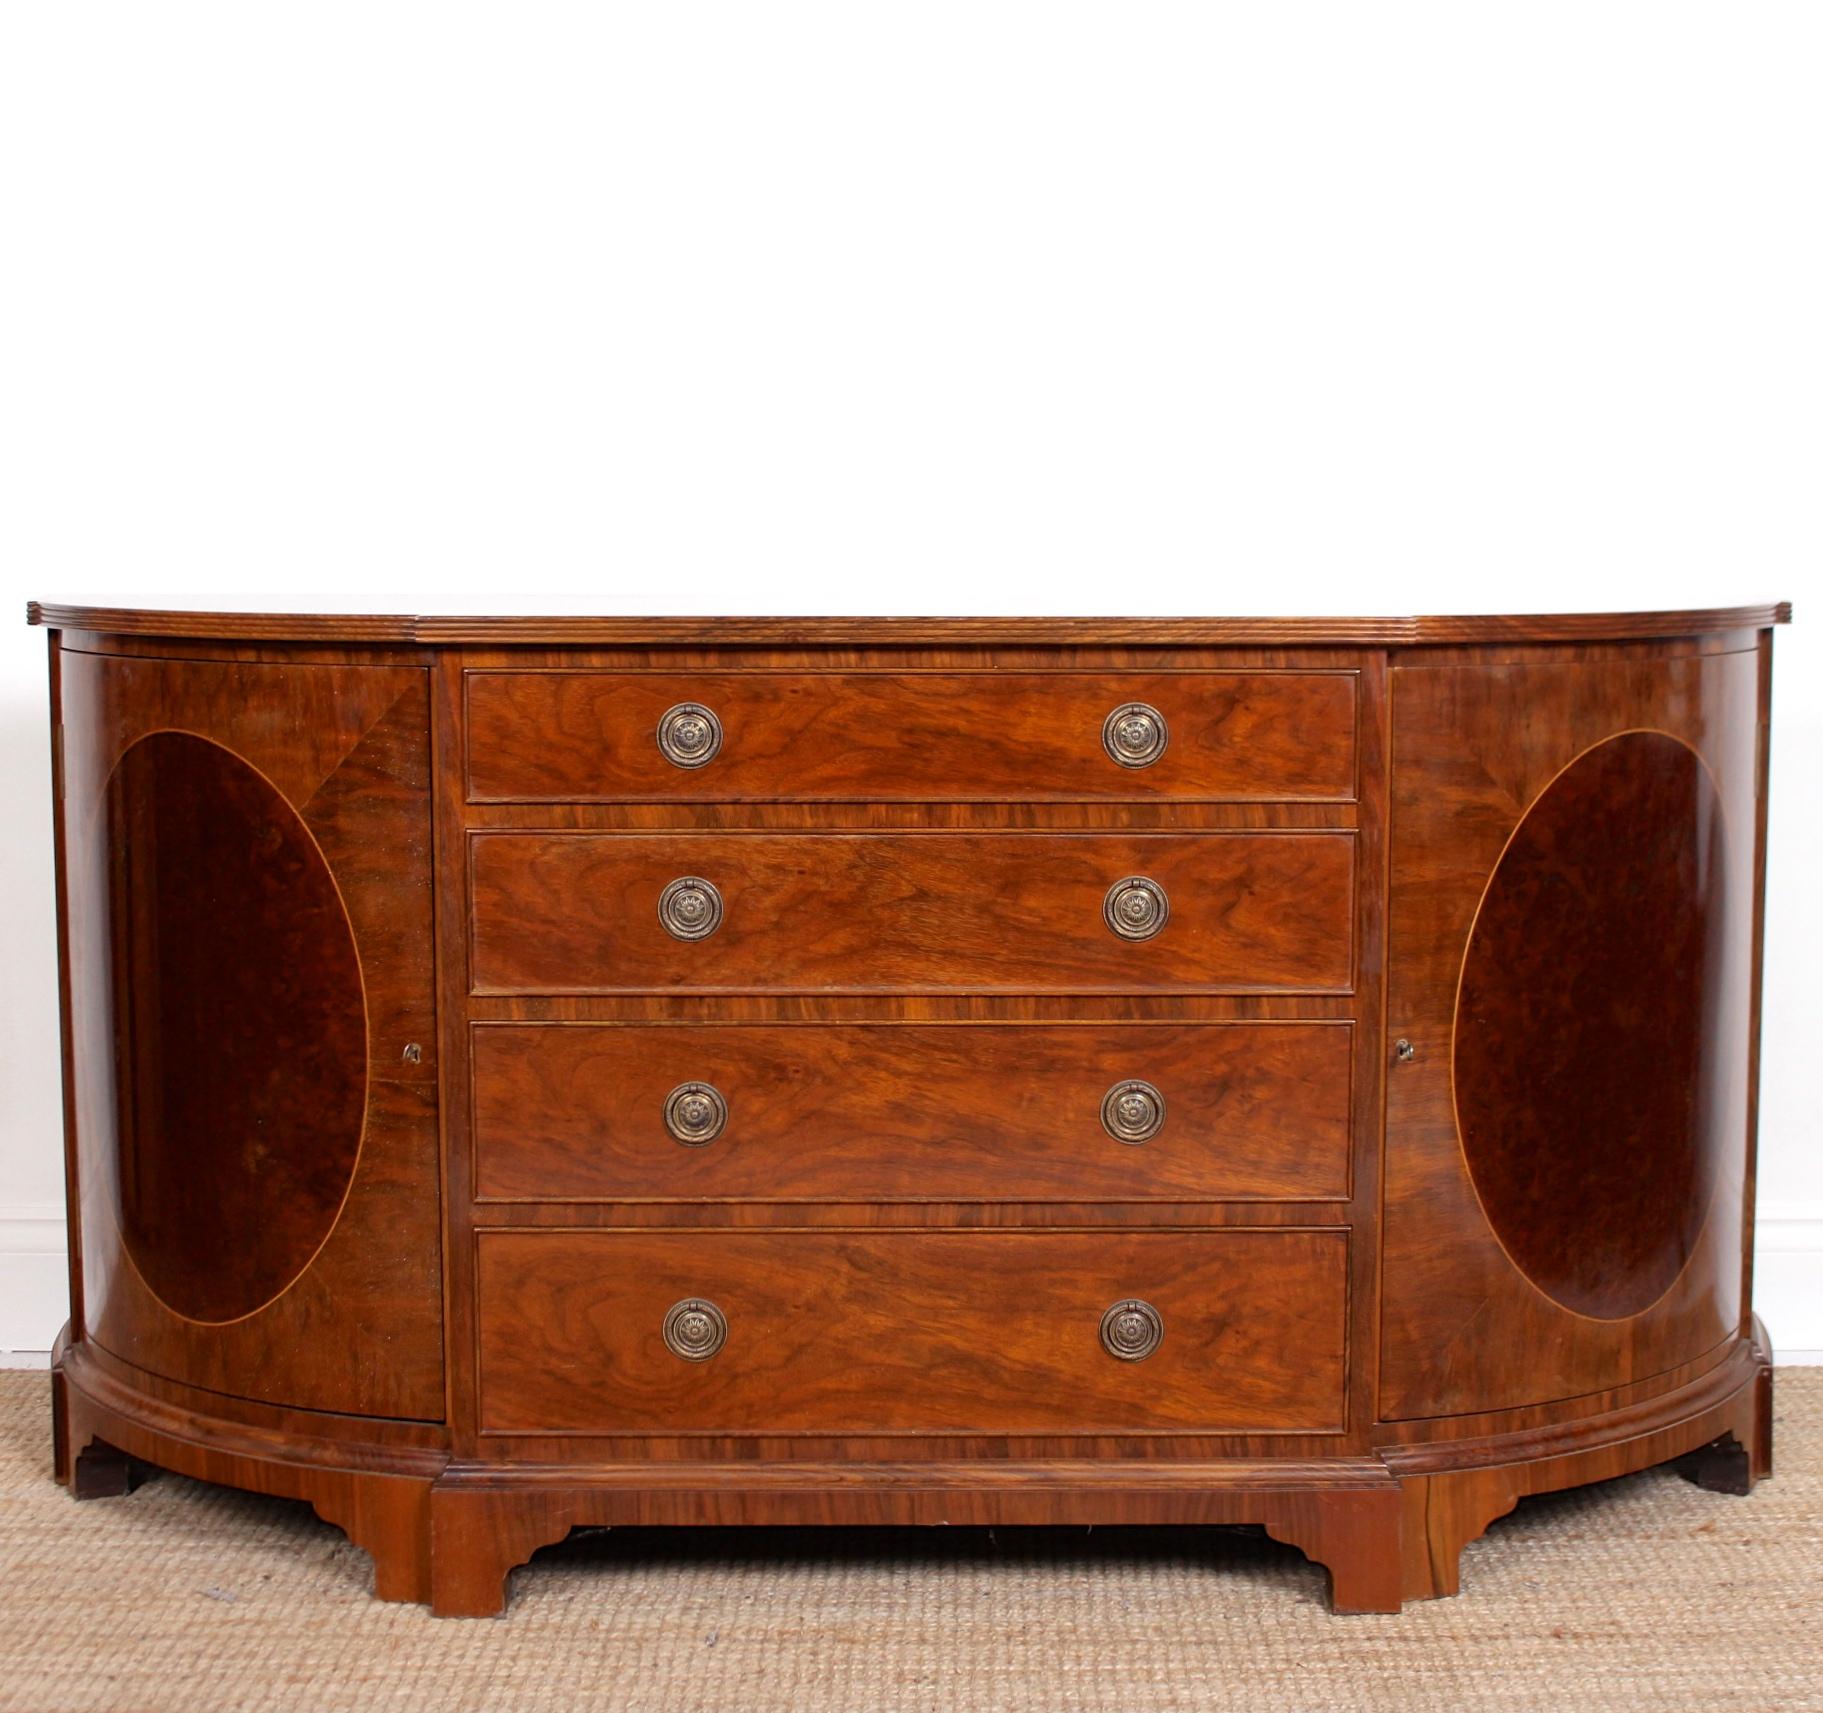 A pair of fine quality bowfront side cabinets.

Constructed from mahogany with magnificent Cuban mahogany and burl walnut marquetry veneers.

A central column of four graduated cock-beaded drawers mounted with good handles, clean oak-lined